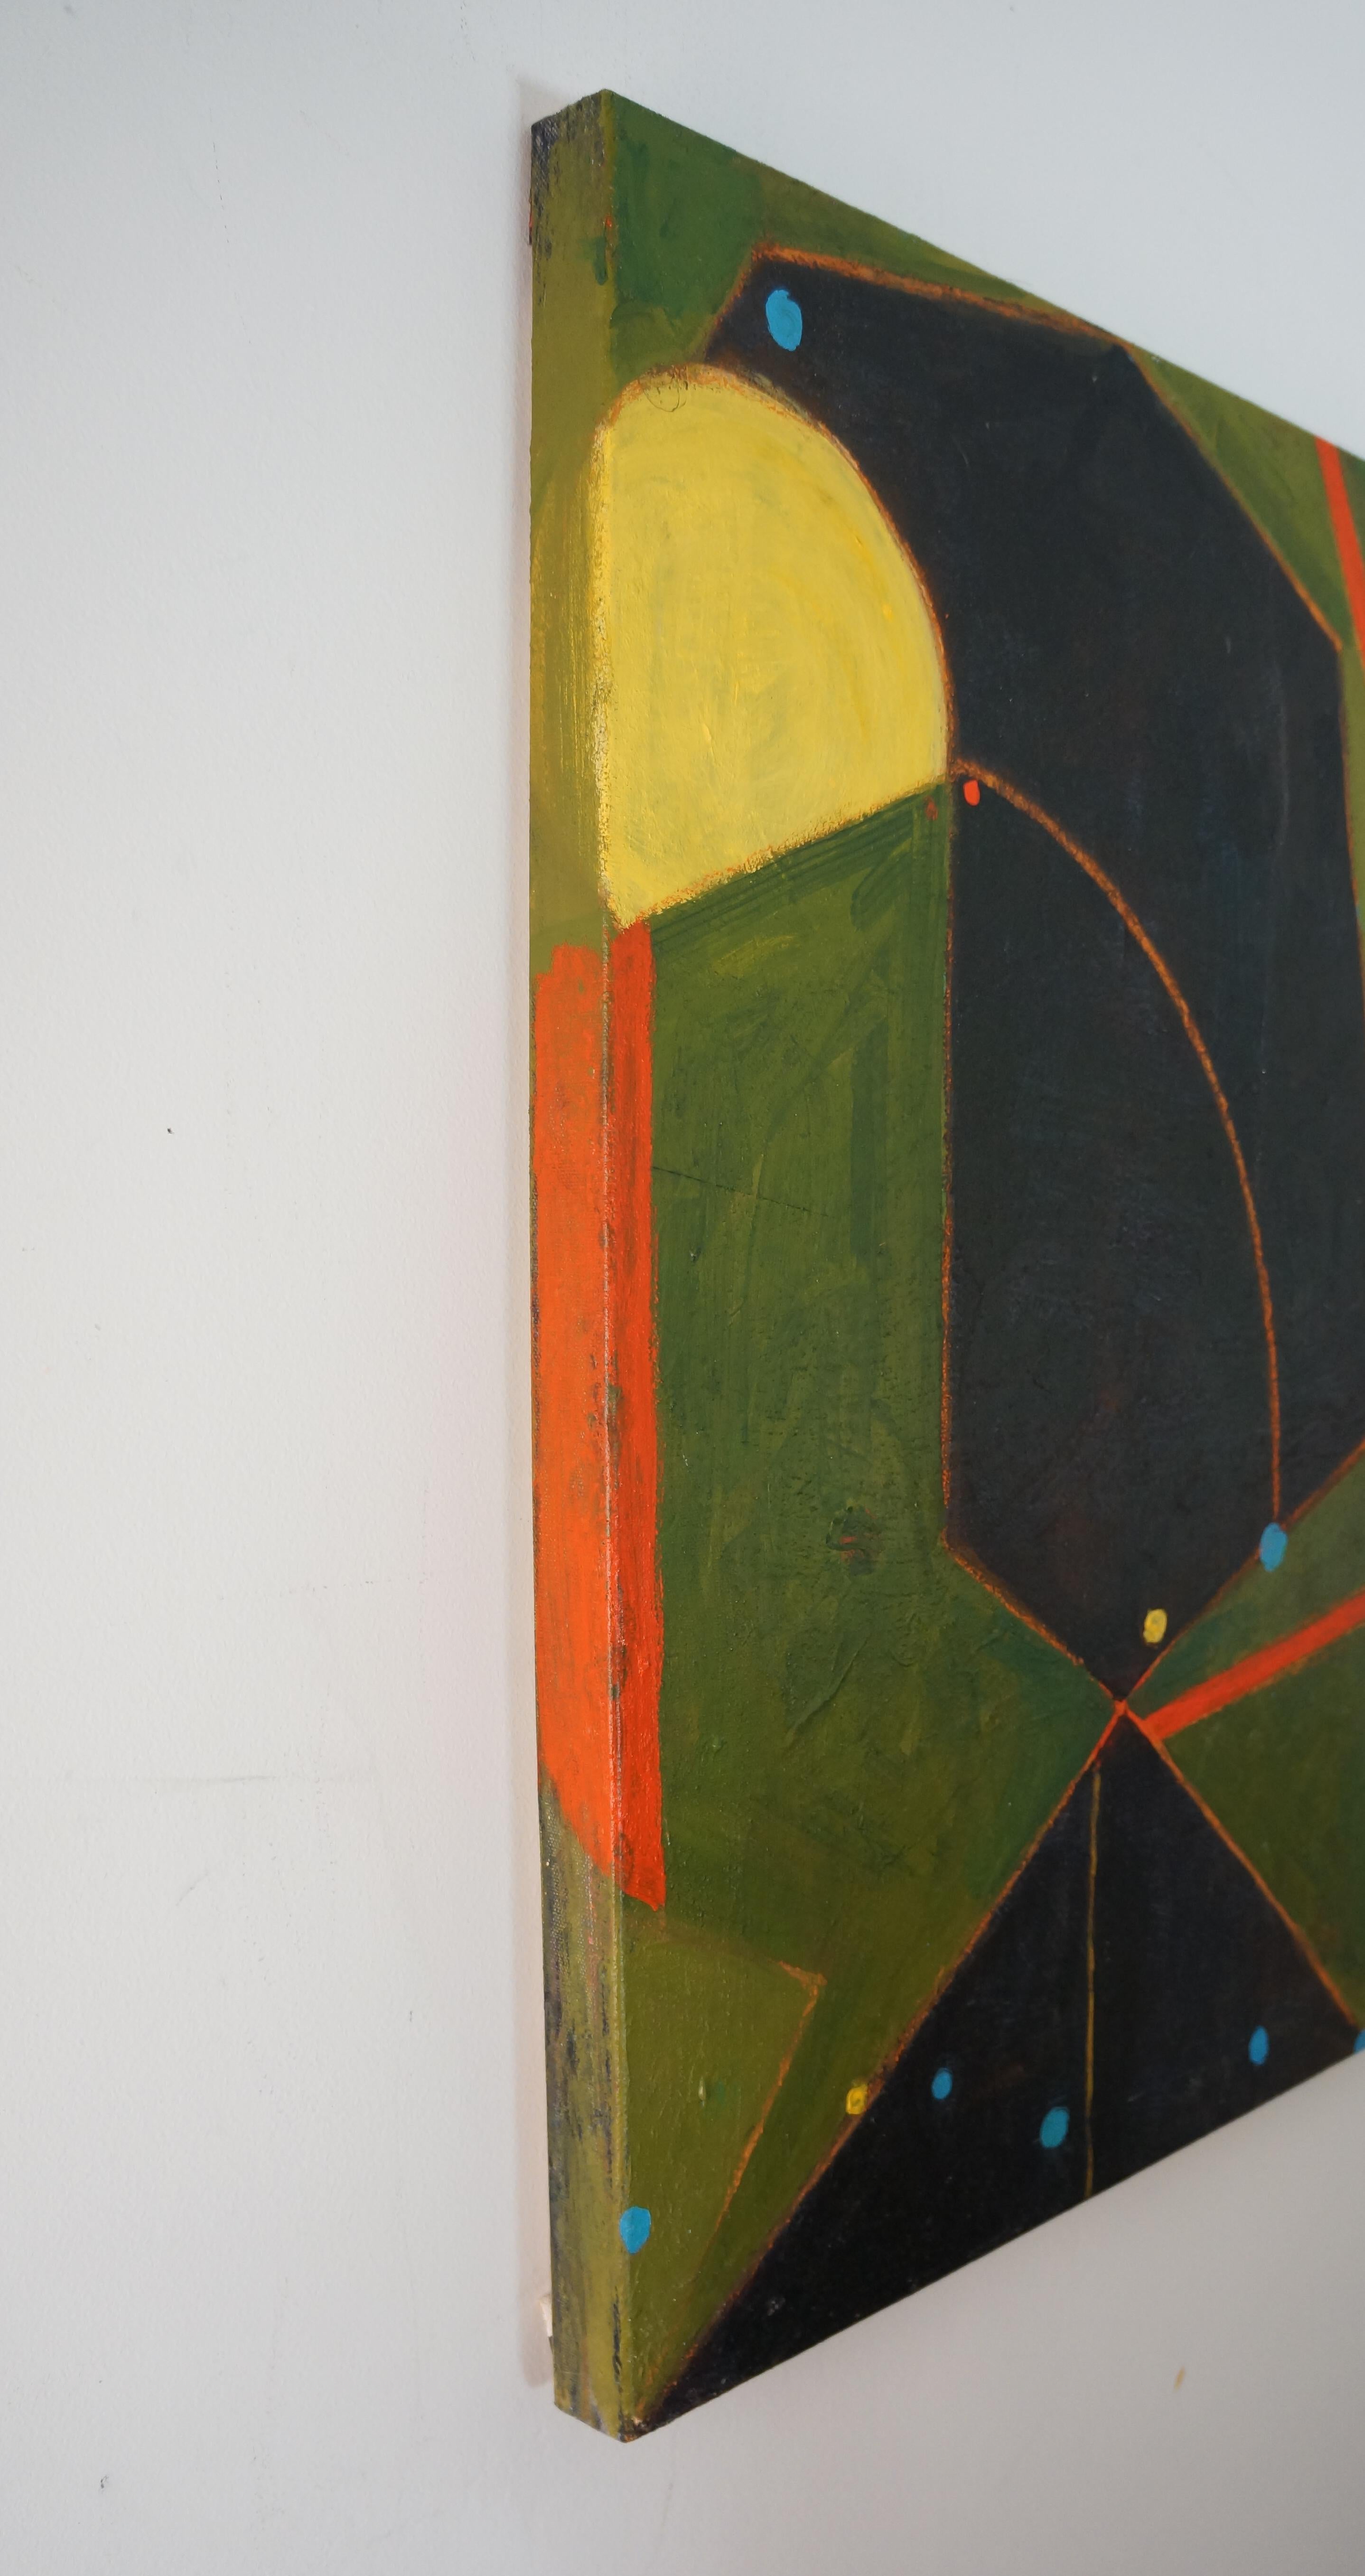 <p>Artist Comments<br>Artist Linda Cassidy employs organically composed geometric forms in an alluring abstract. She explores a playfulness inherent in the saturated color and the mixture of fluid and geometric forms that results in harmonic unity.